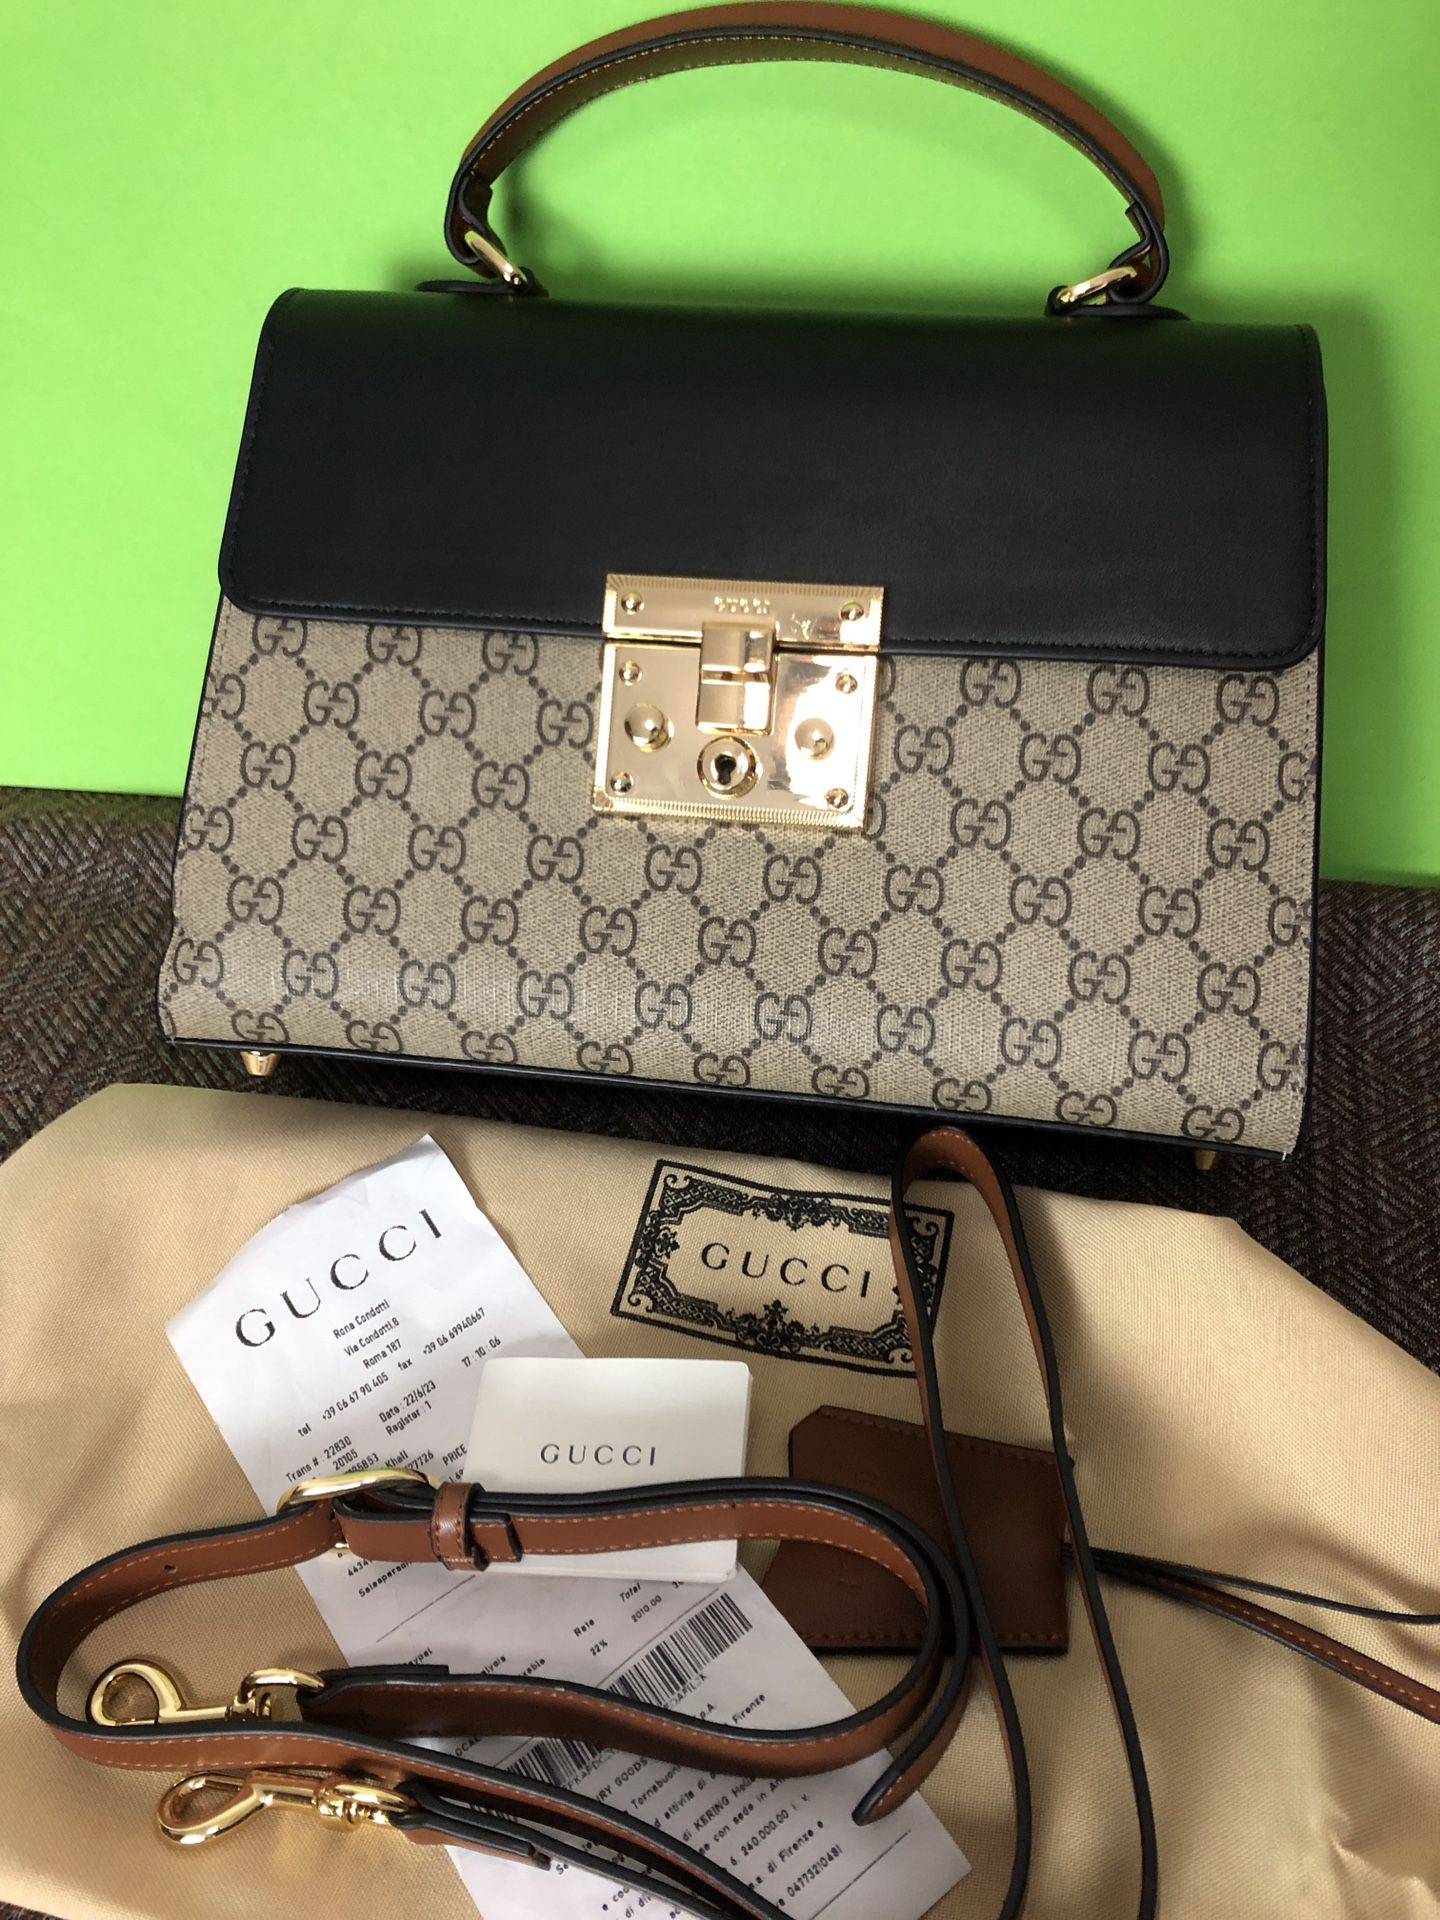 gucci messenger bag Authentic With Dust Bag